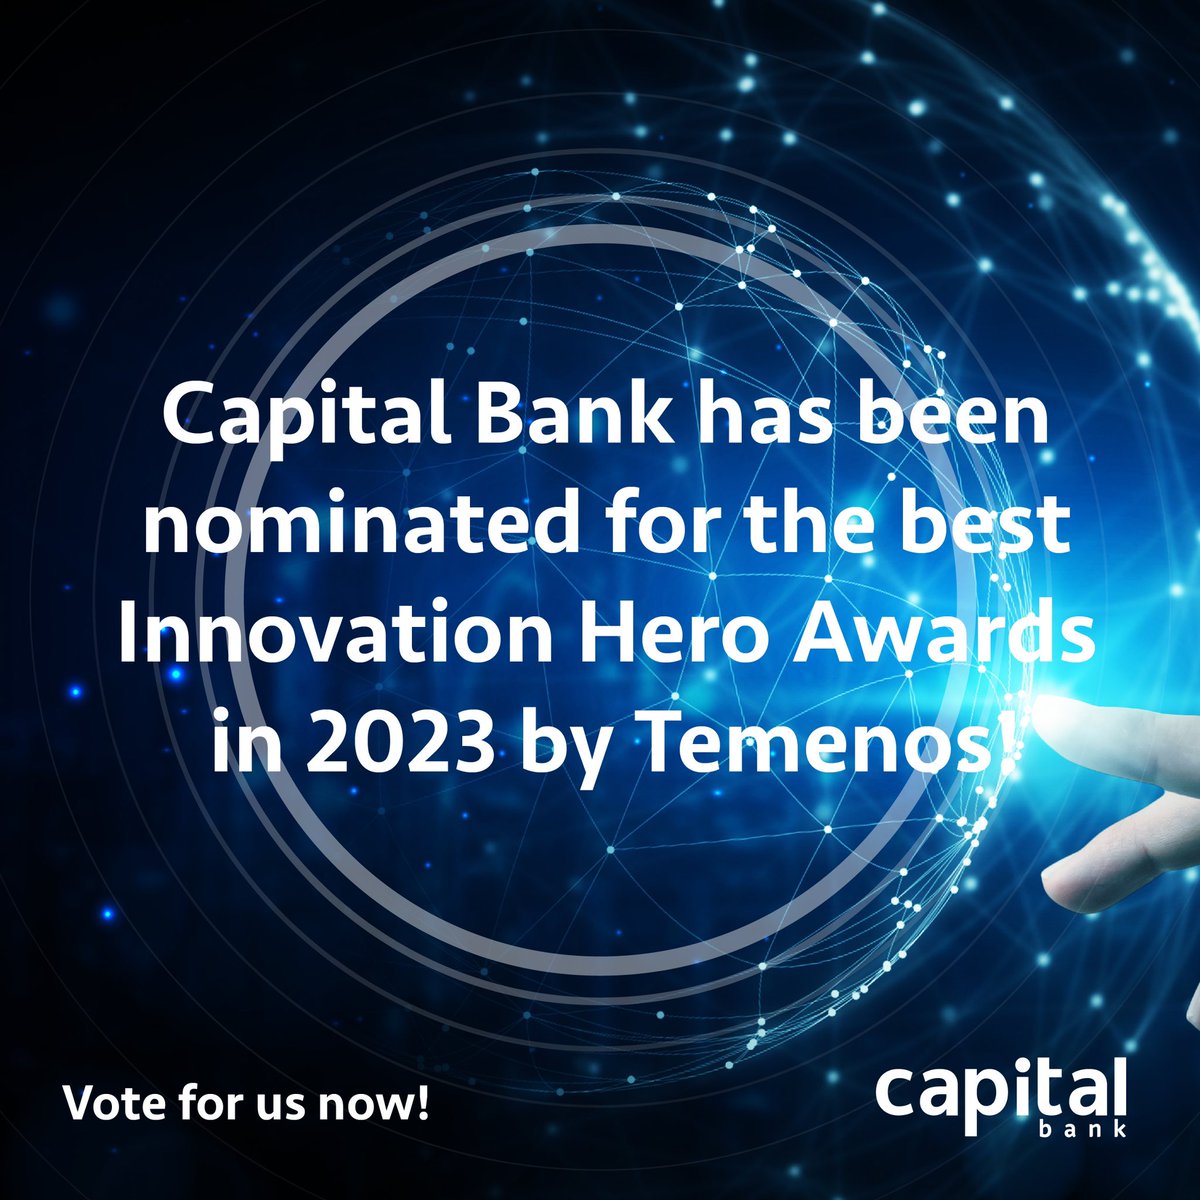 We’re honored to announce that we have been nominated for the most innovative banking project in 2023 in Innovation Hero Award by Temenos! Vote for Capital Bank and show your support until 21st April on the link below: lnkd.in/g3yZeGuY